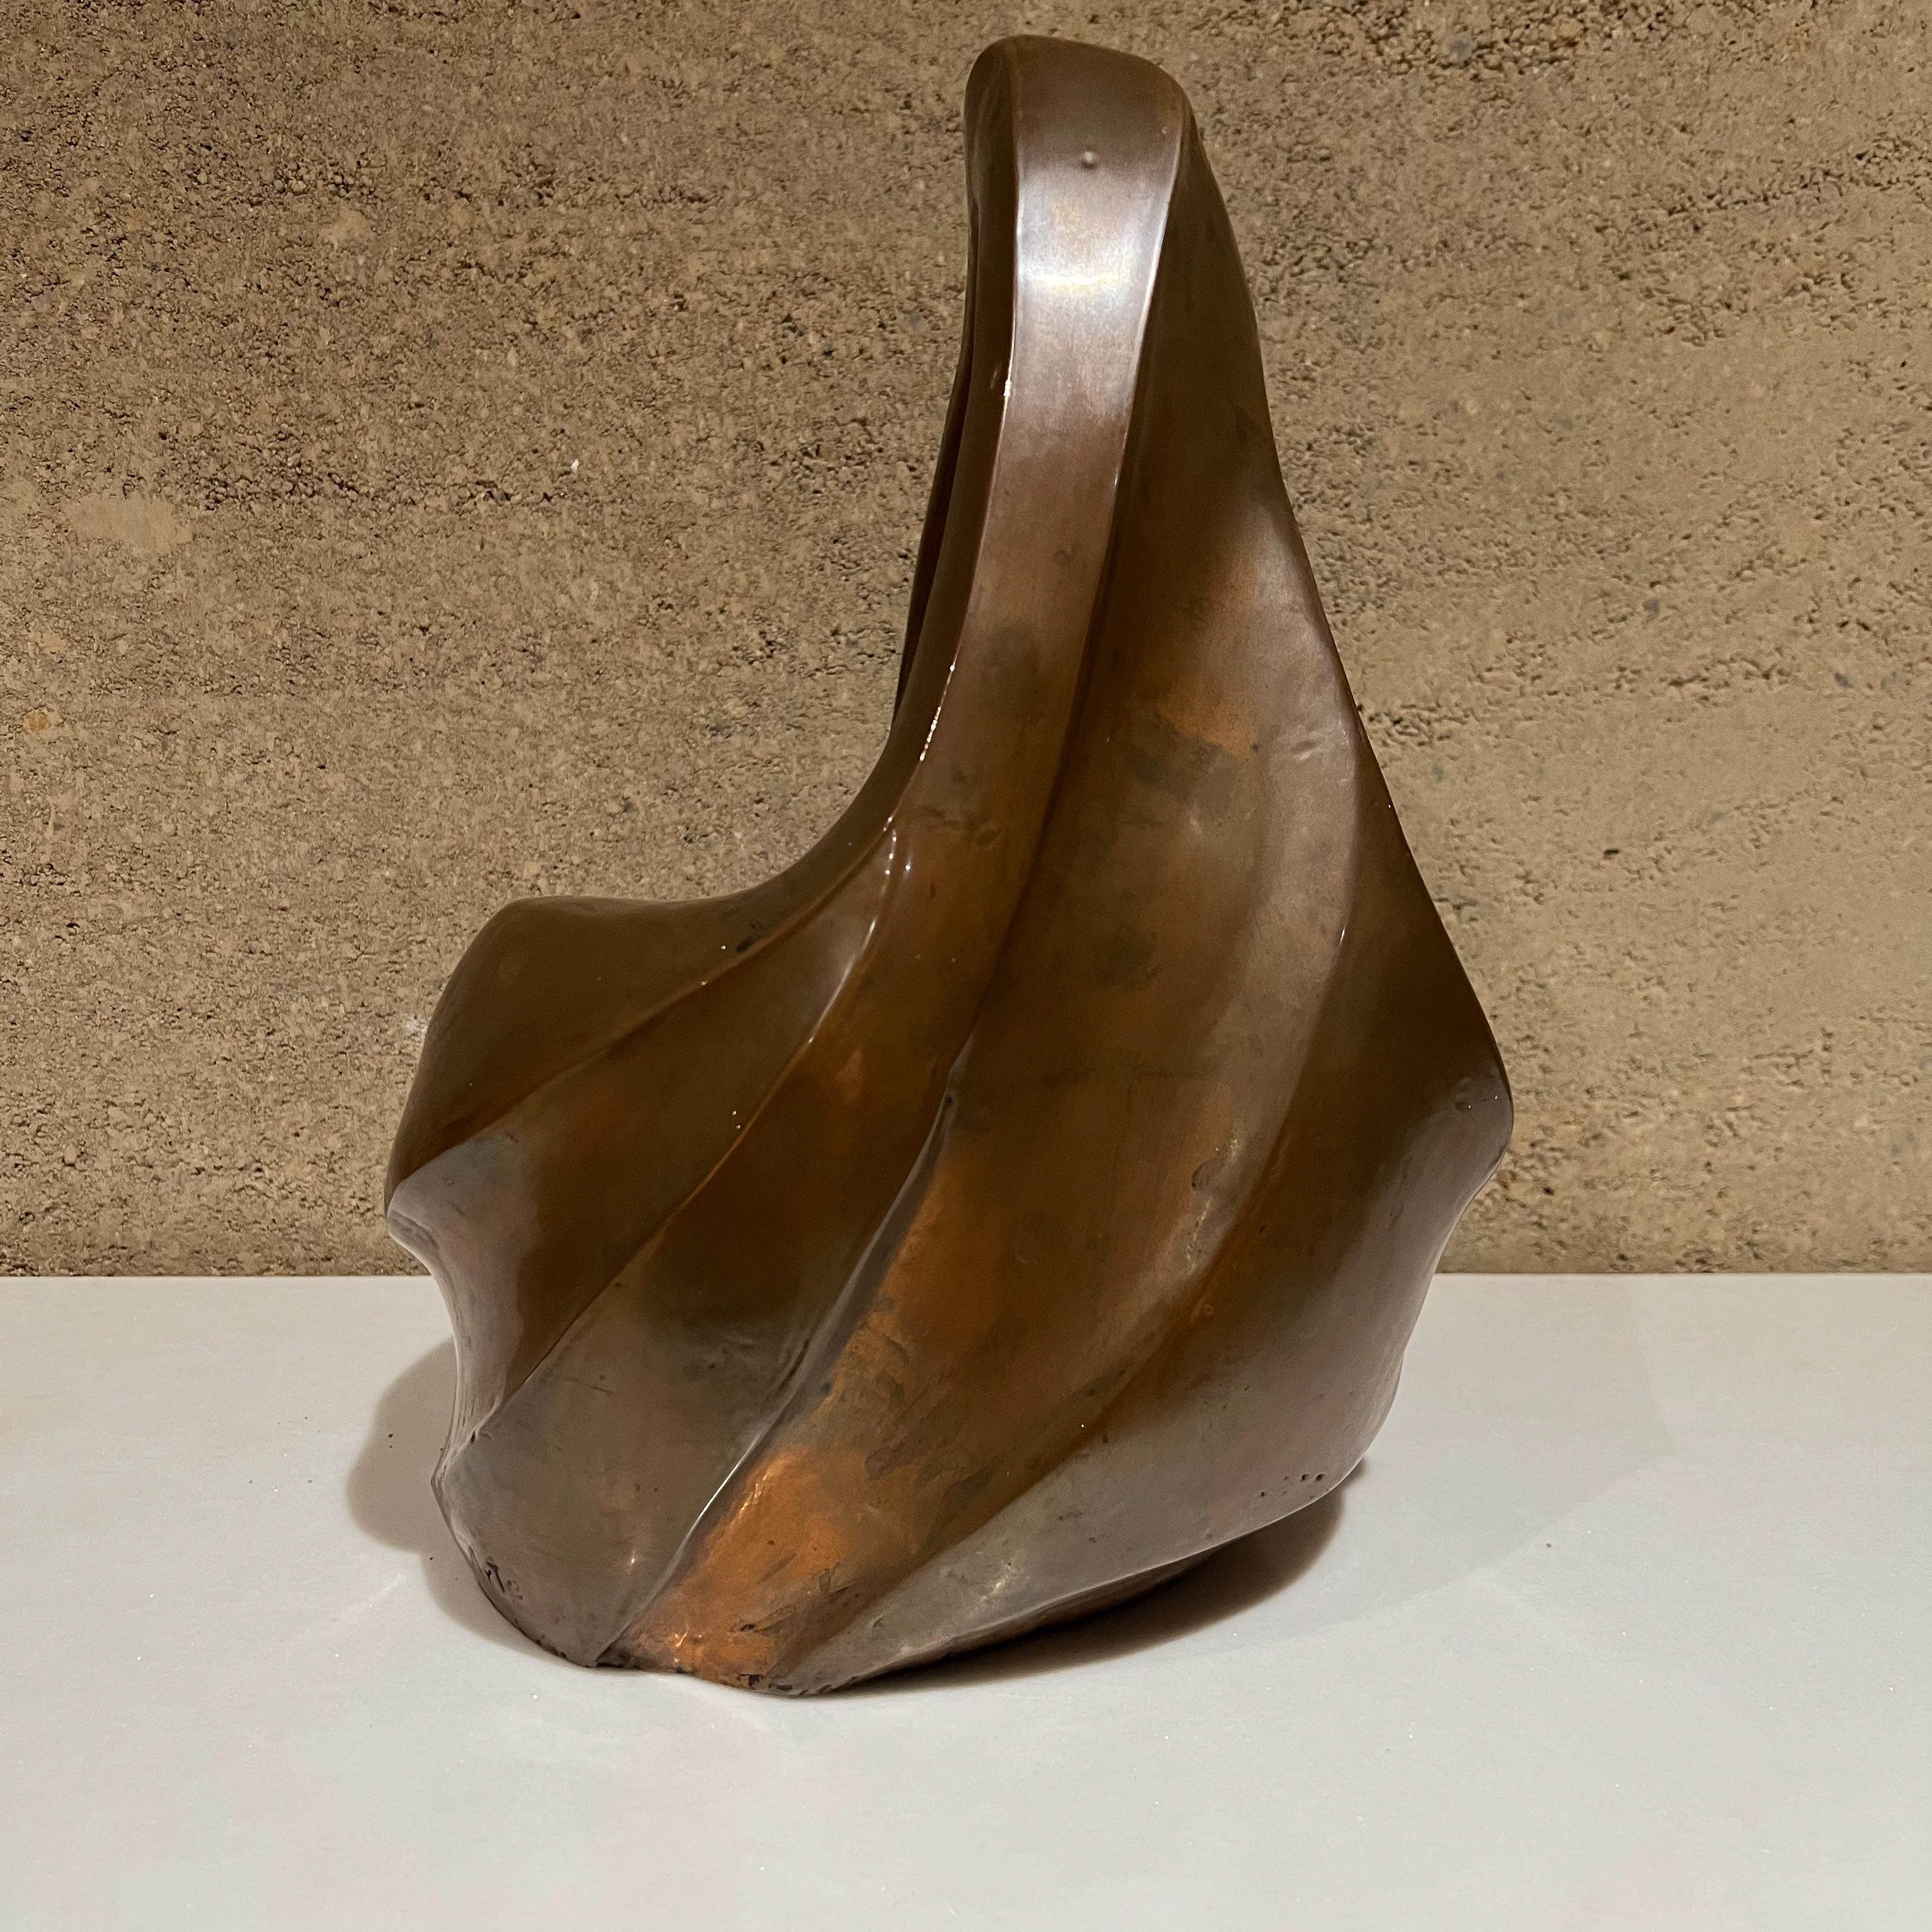 1980s Post Modern Art Table Sculpture in Organic Swirled Copper Signed  For Sale 2